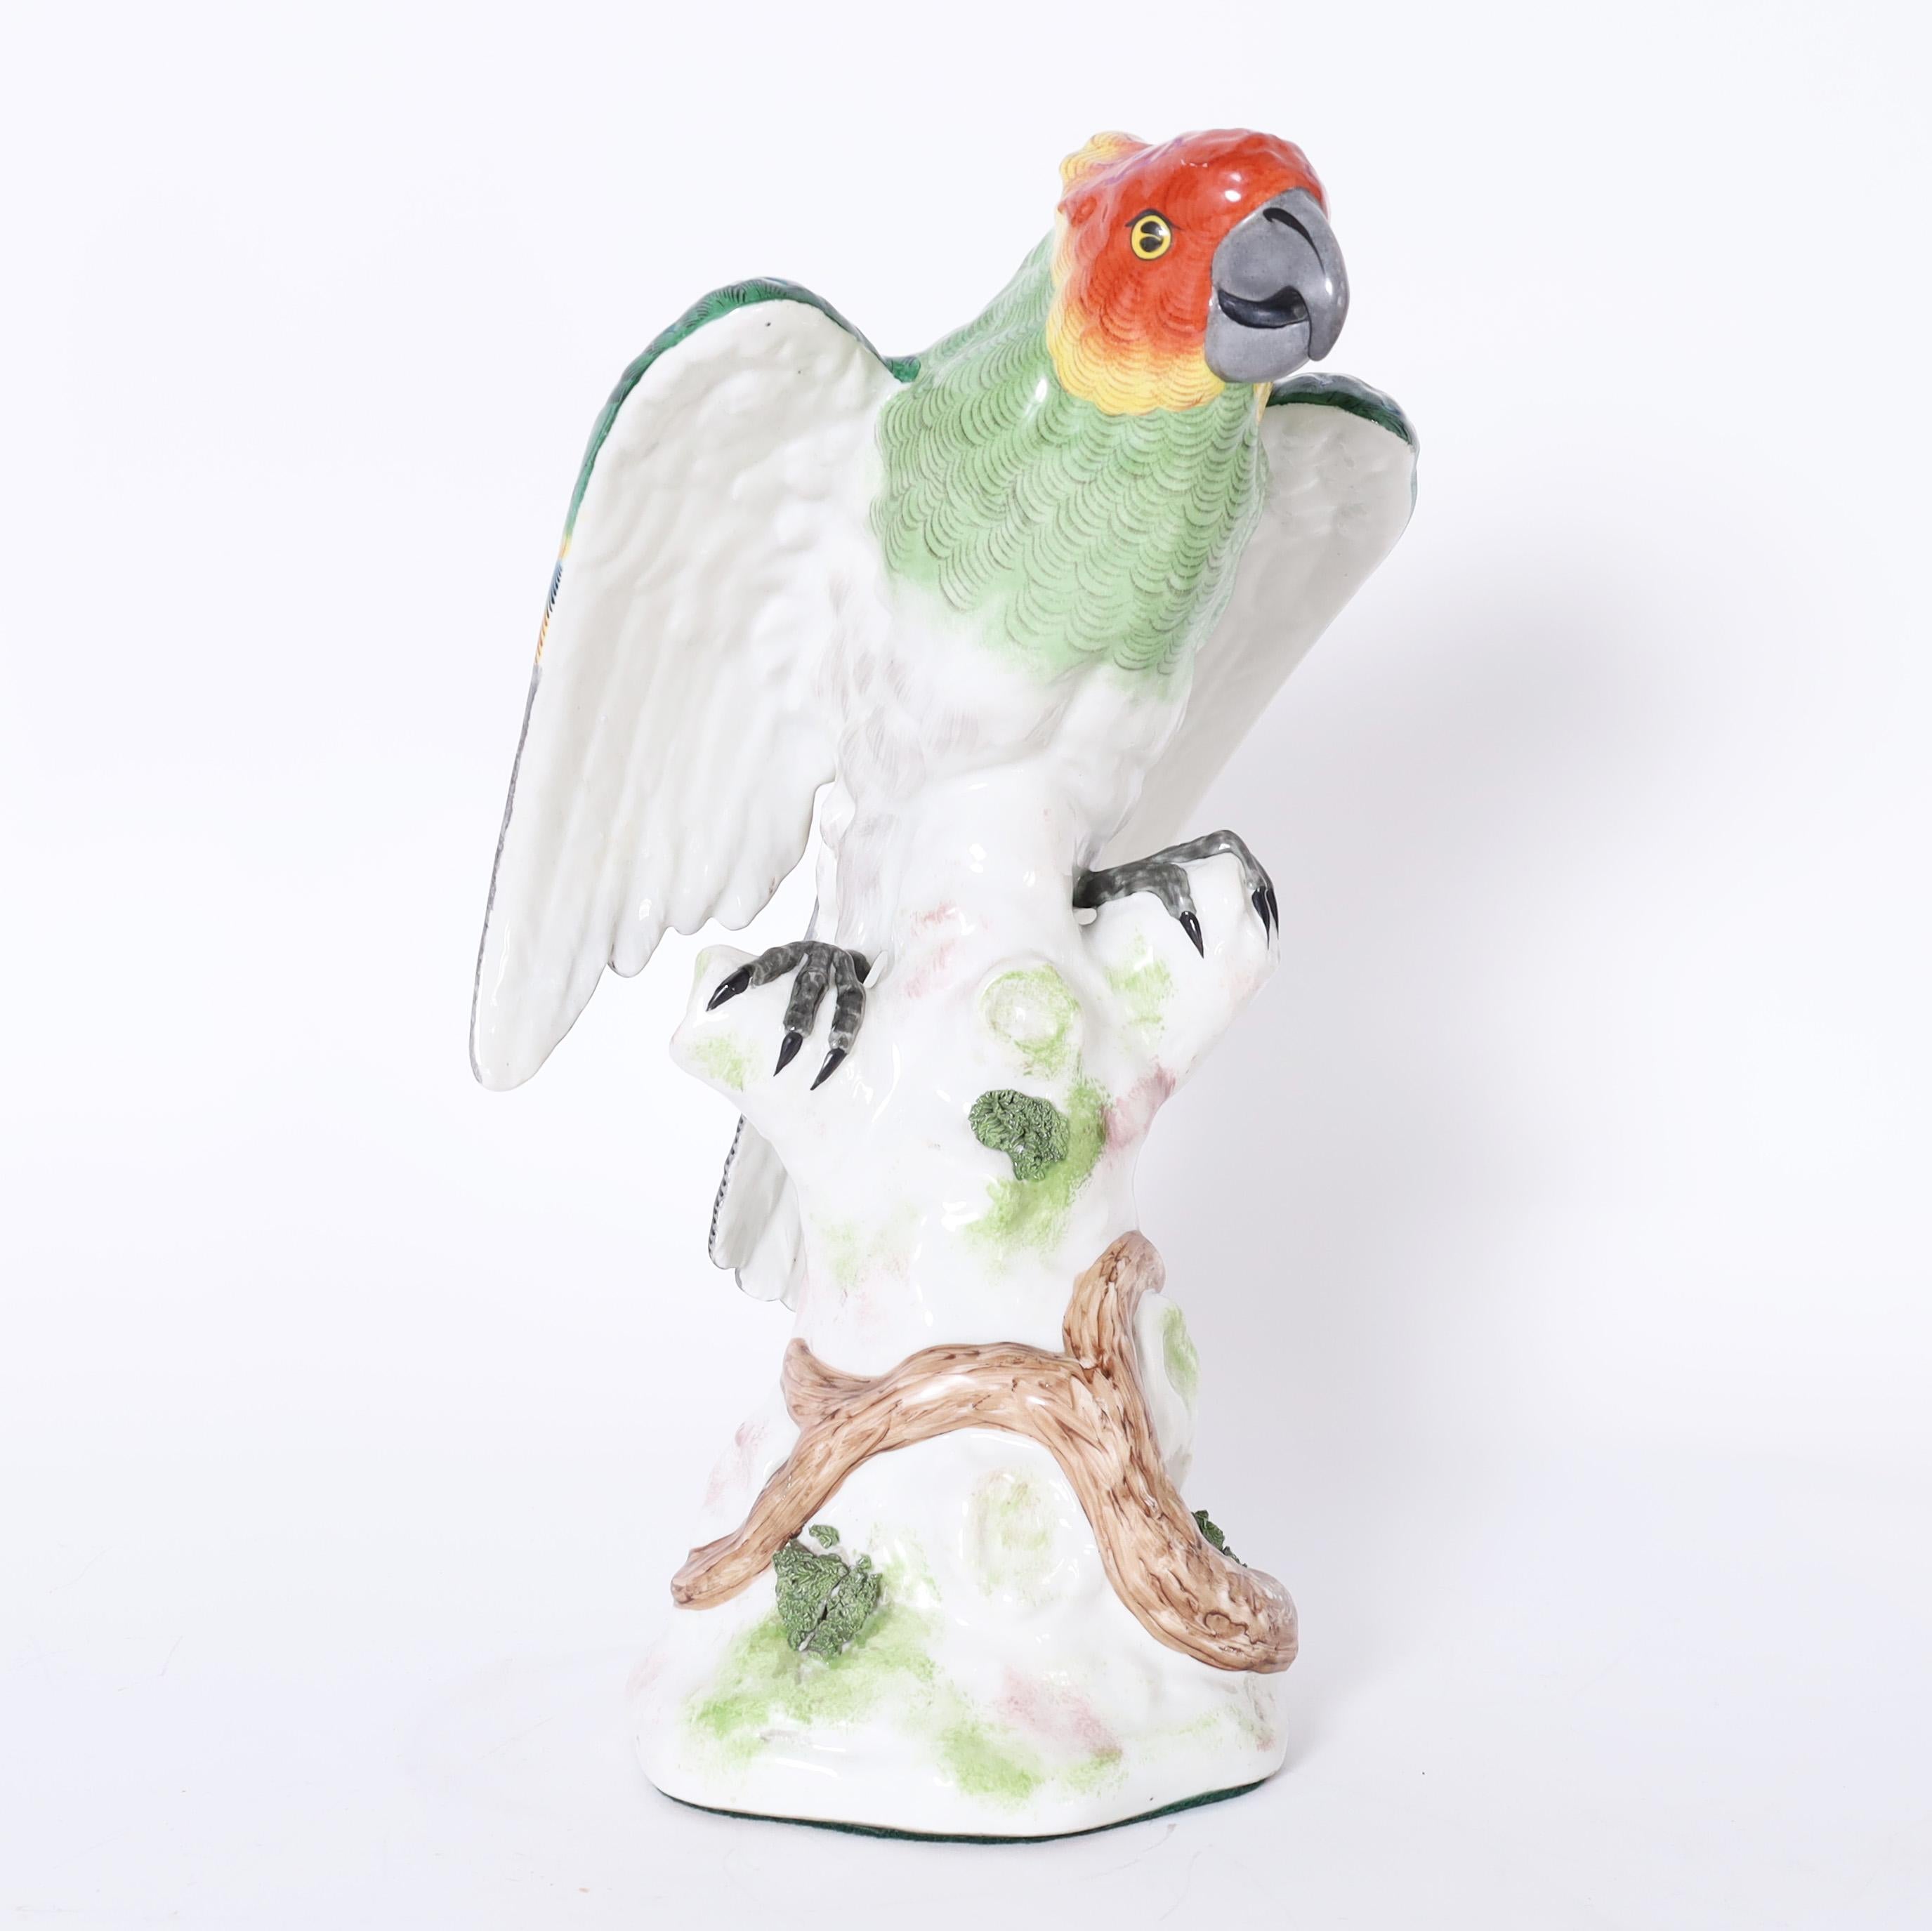 Charming life size porcelain parrot hand decorated in vivid tropical colors, glazed and perched on a tree trunk. Signed with crossed arrows on the back.